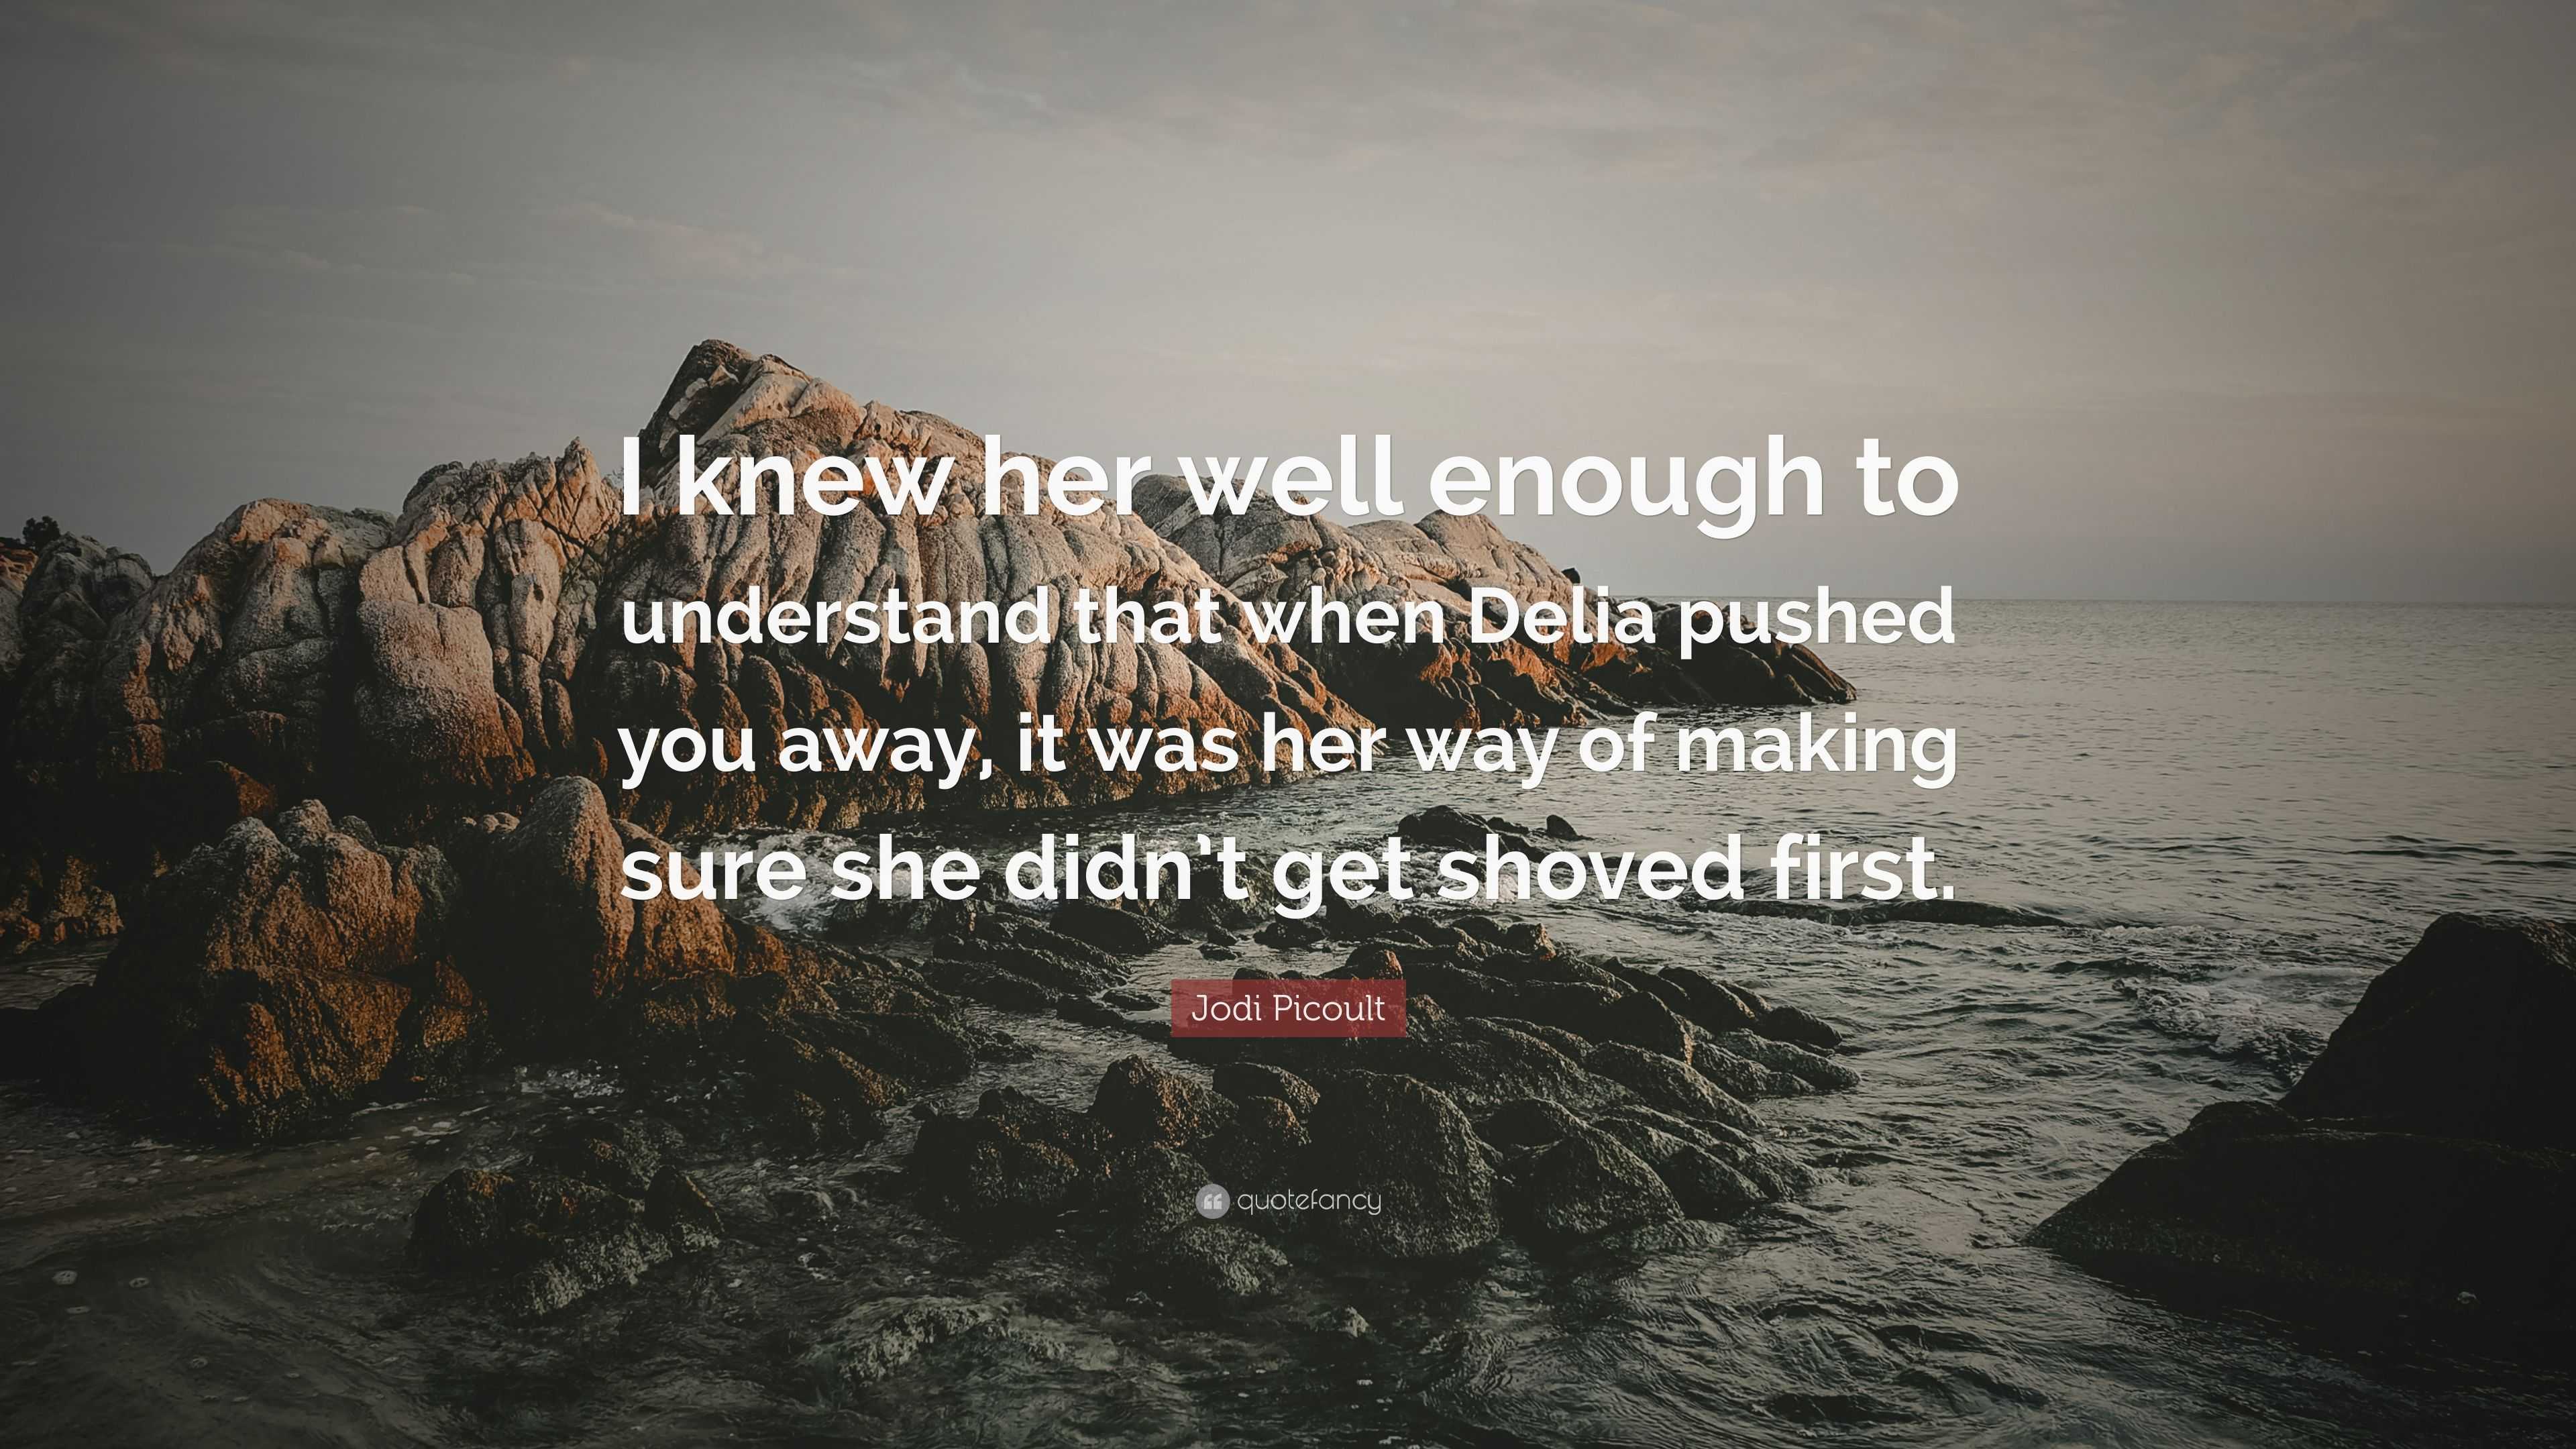 Jodi Picoult Quote: “I knew her well enough to understand that when ...